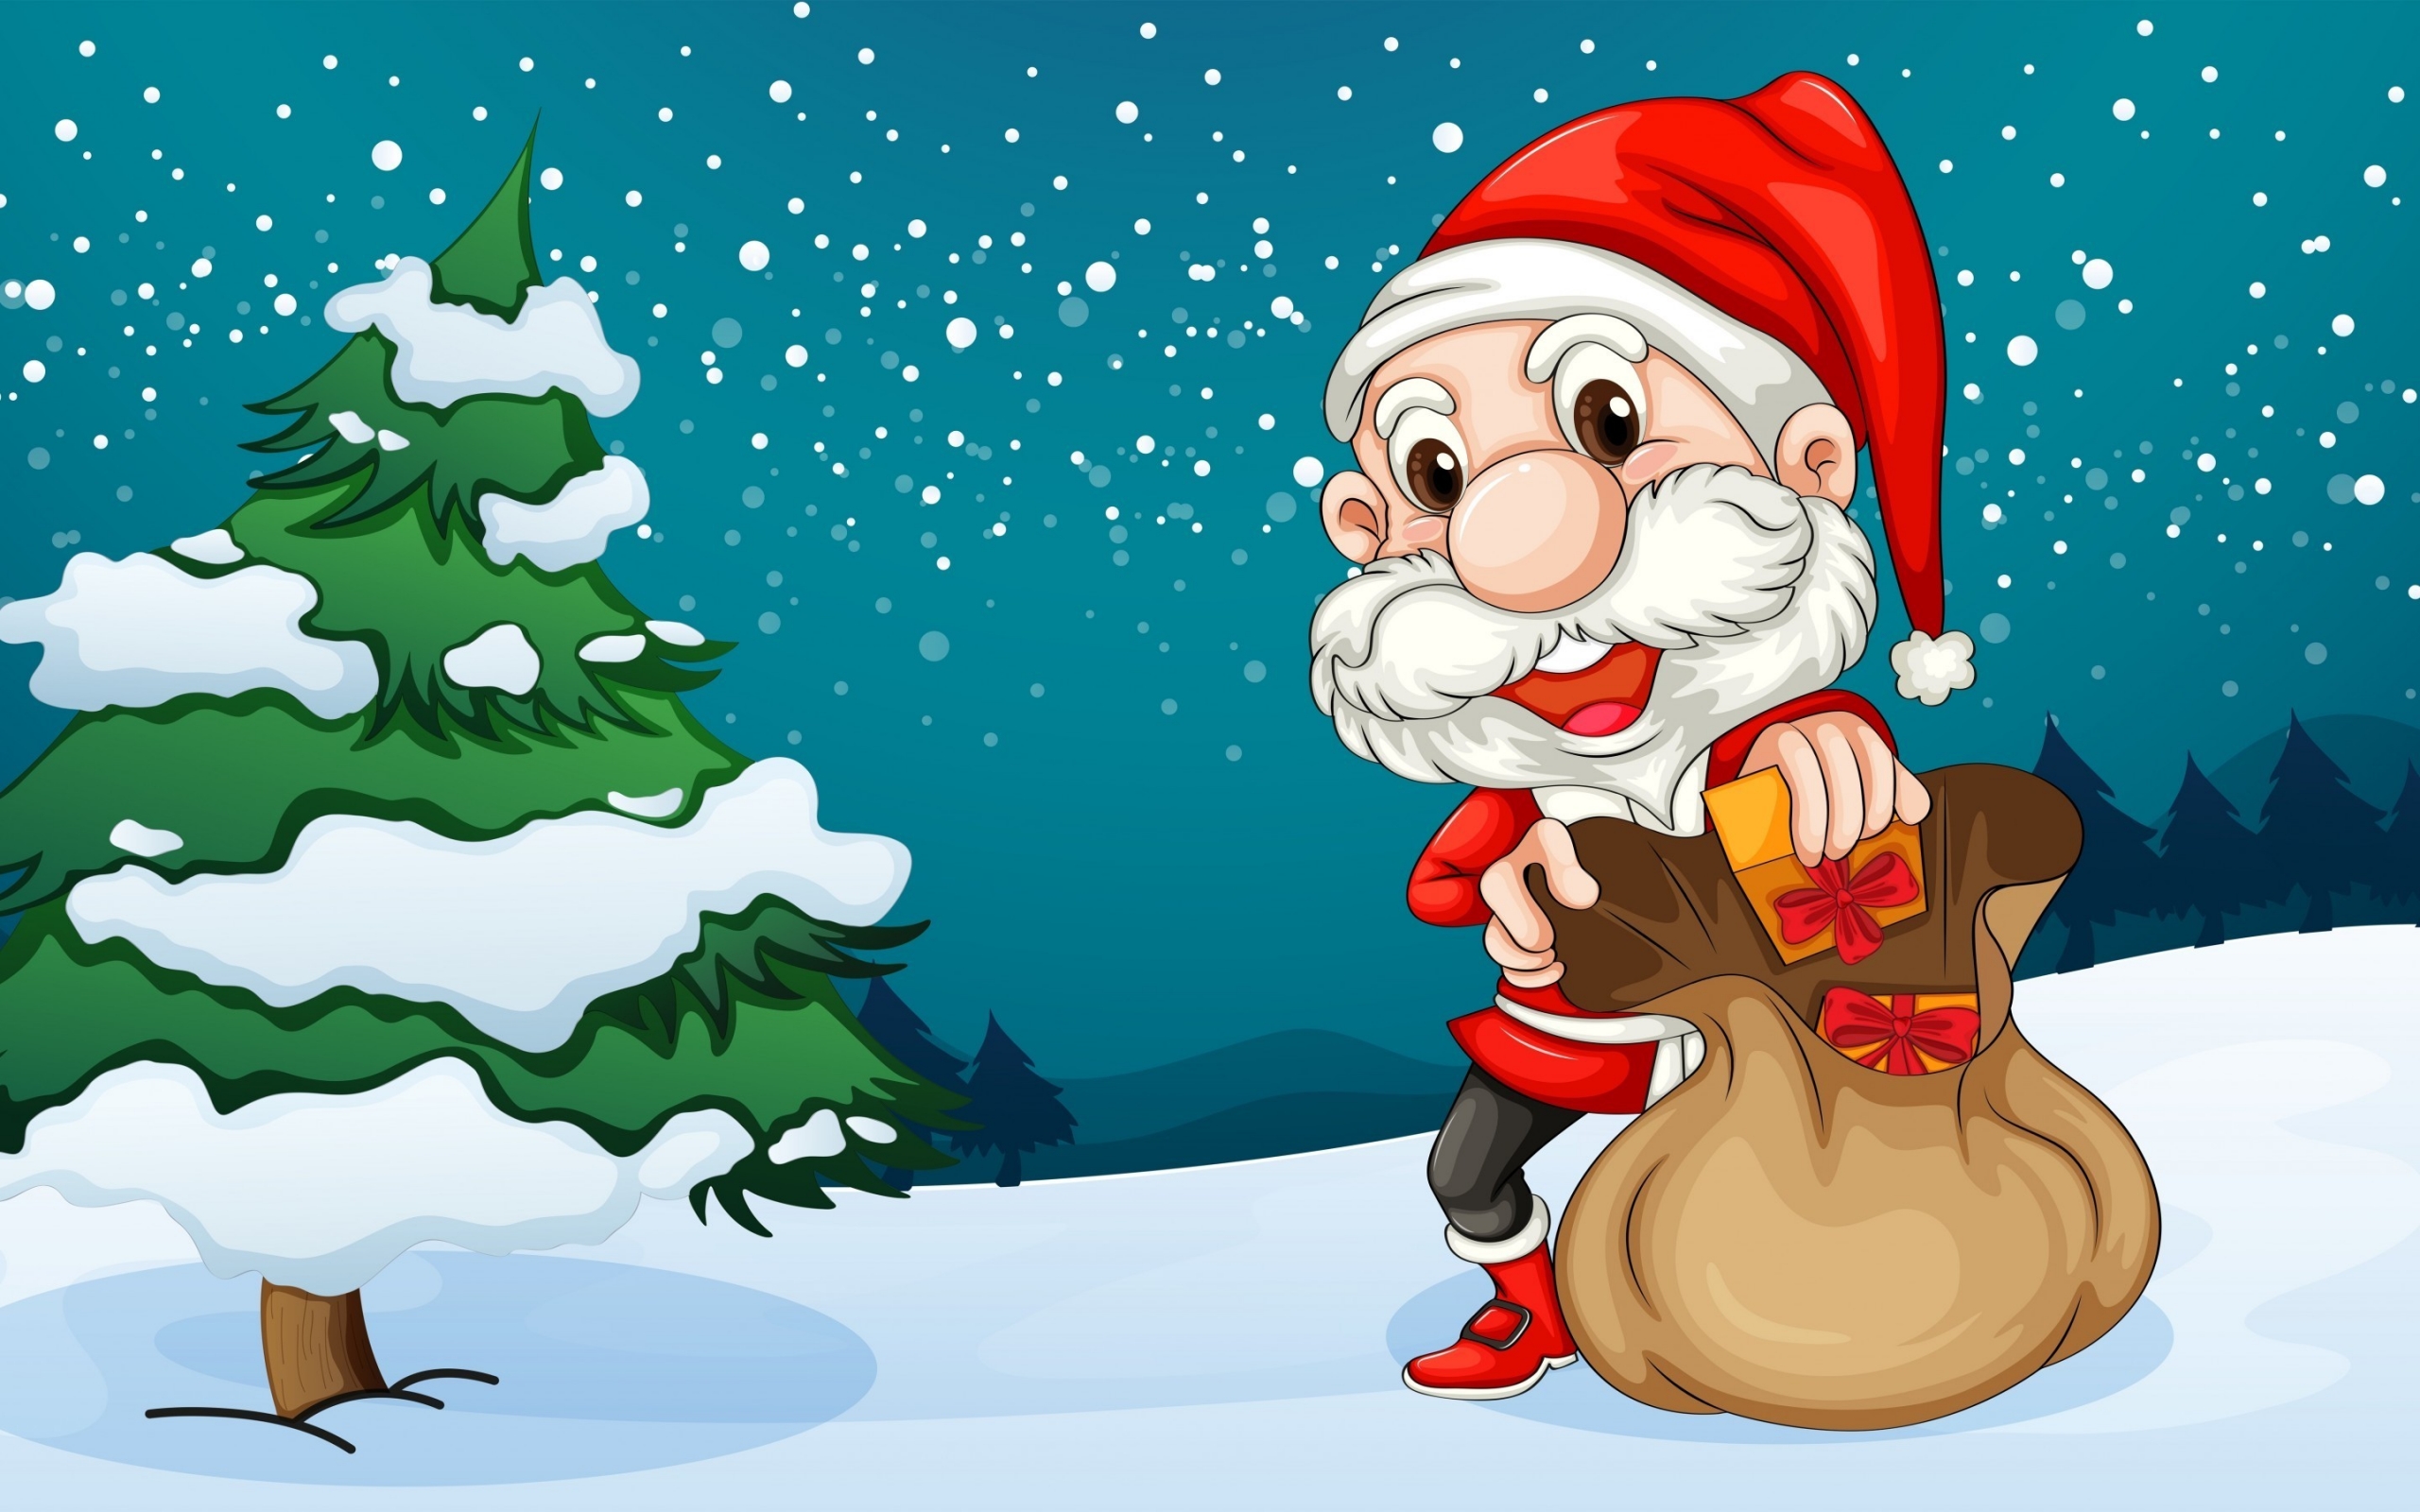 The Happiest Santa for 2560 x 1600 widescreen resolution